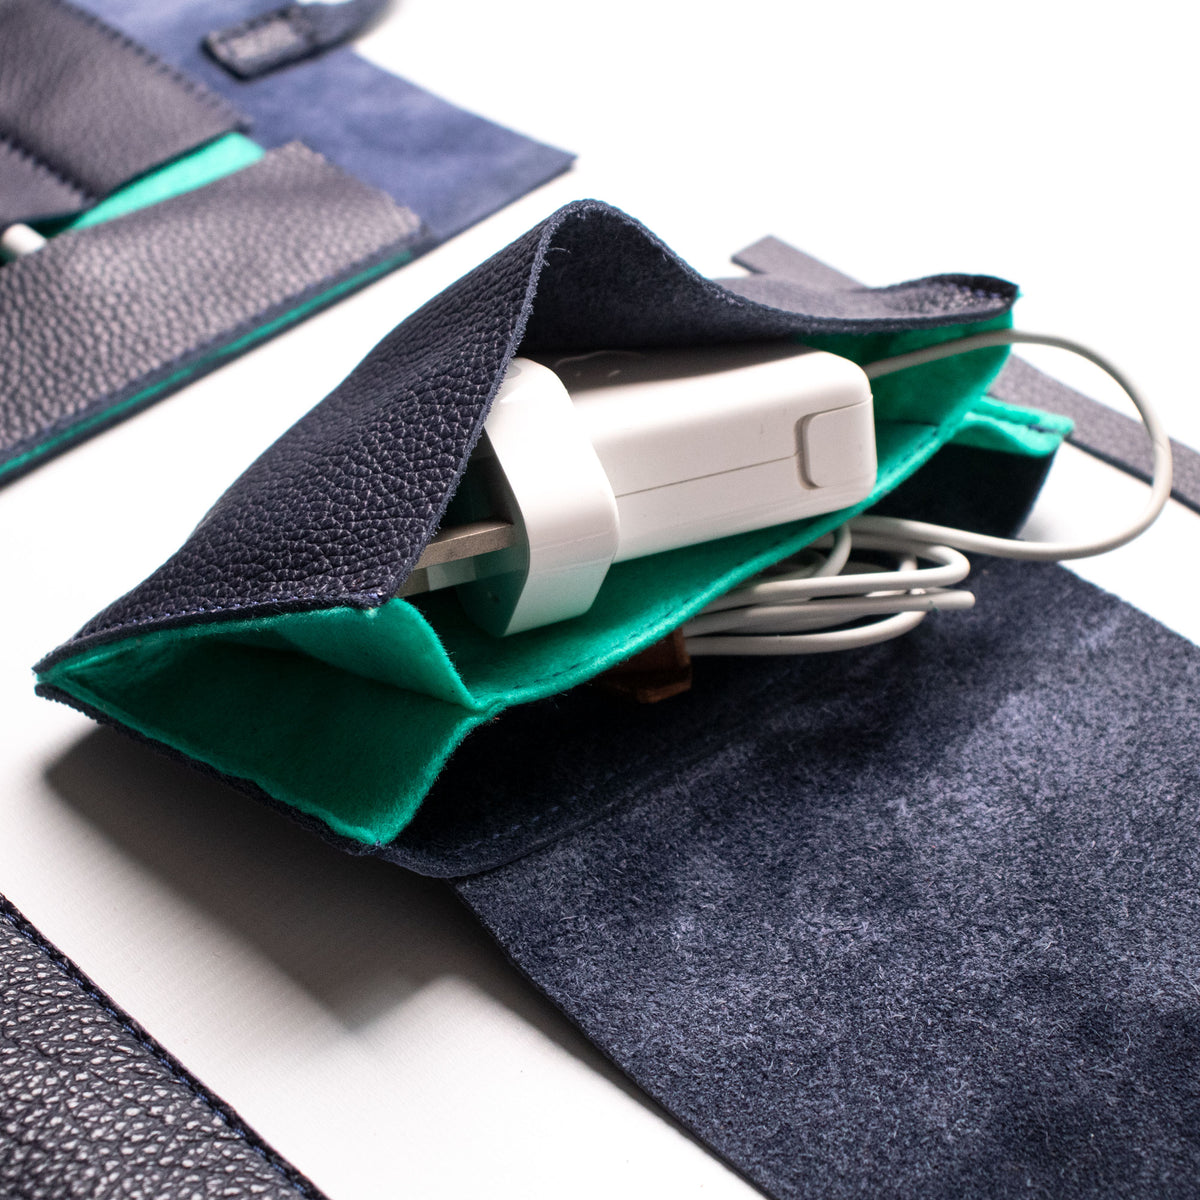 Cable Bag - Navy and Mint - RYAN London